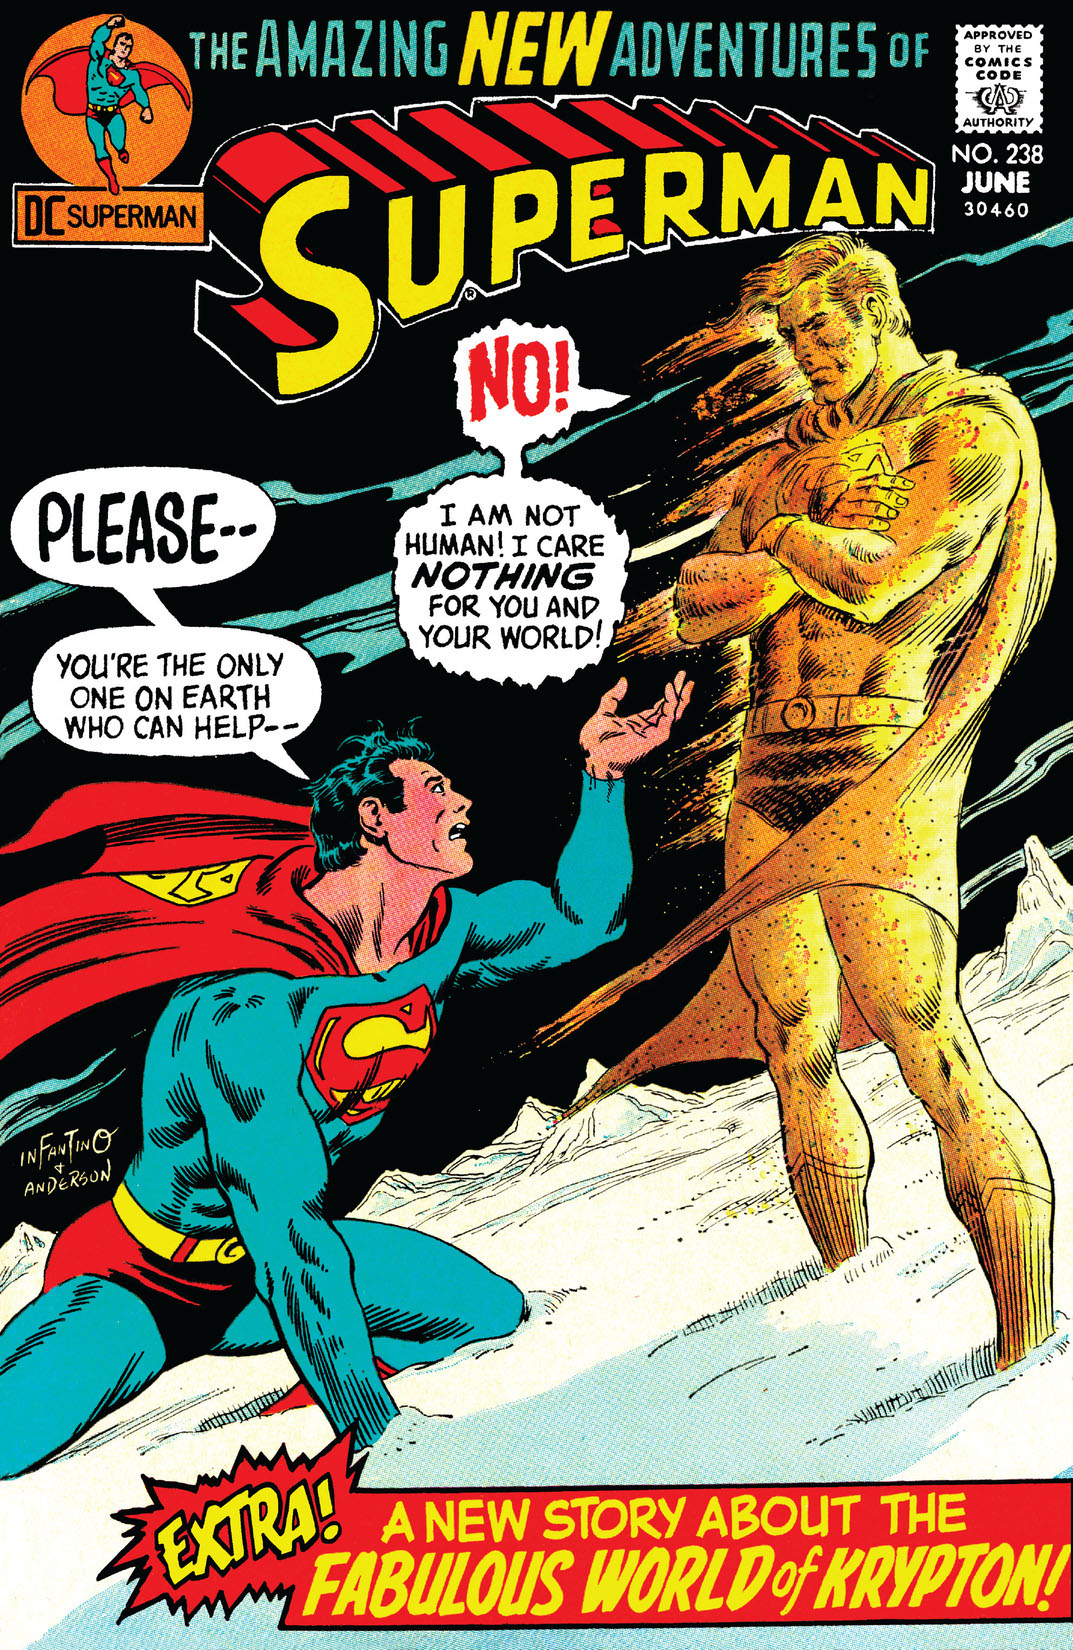 Superman (1939-) #238 preview images